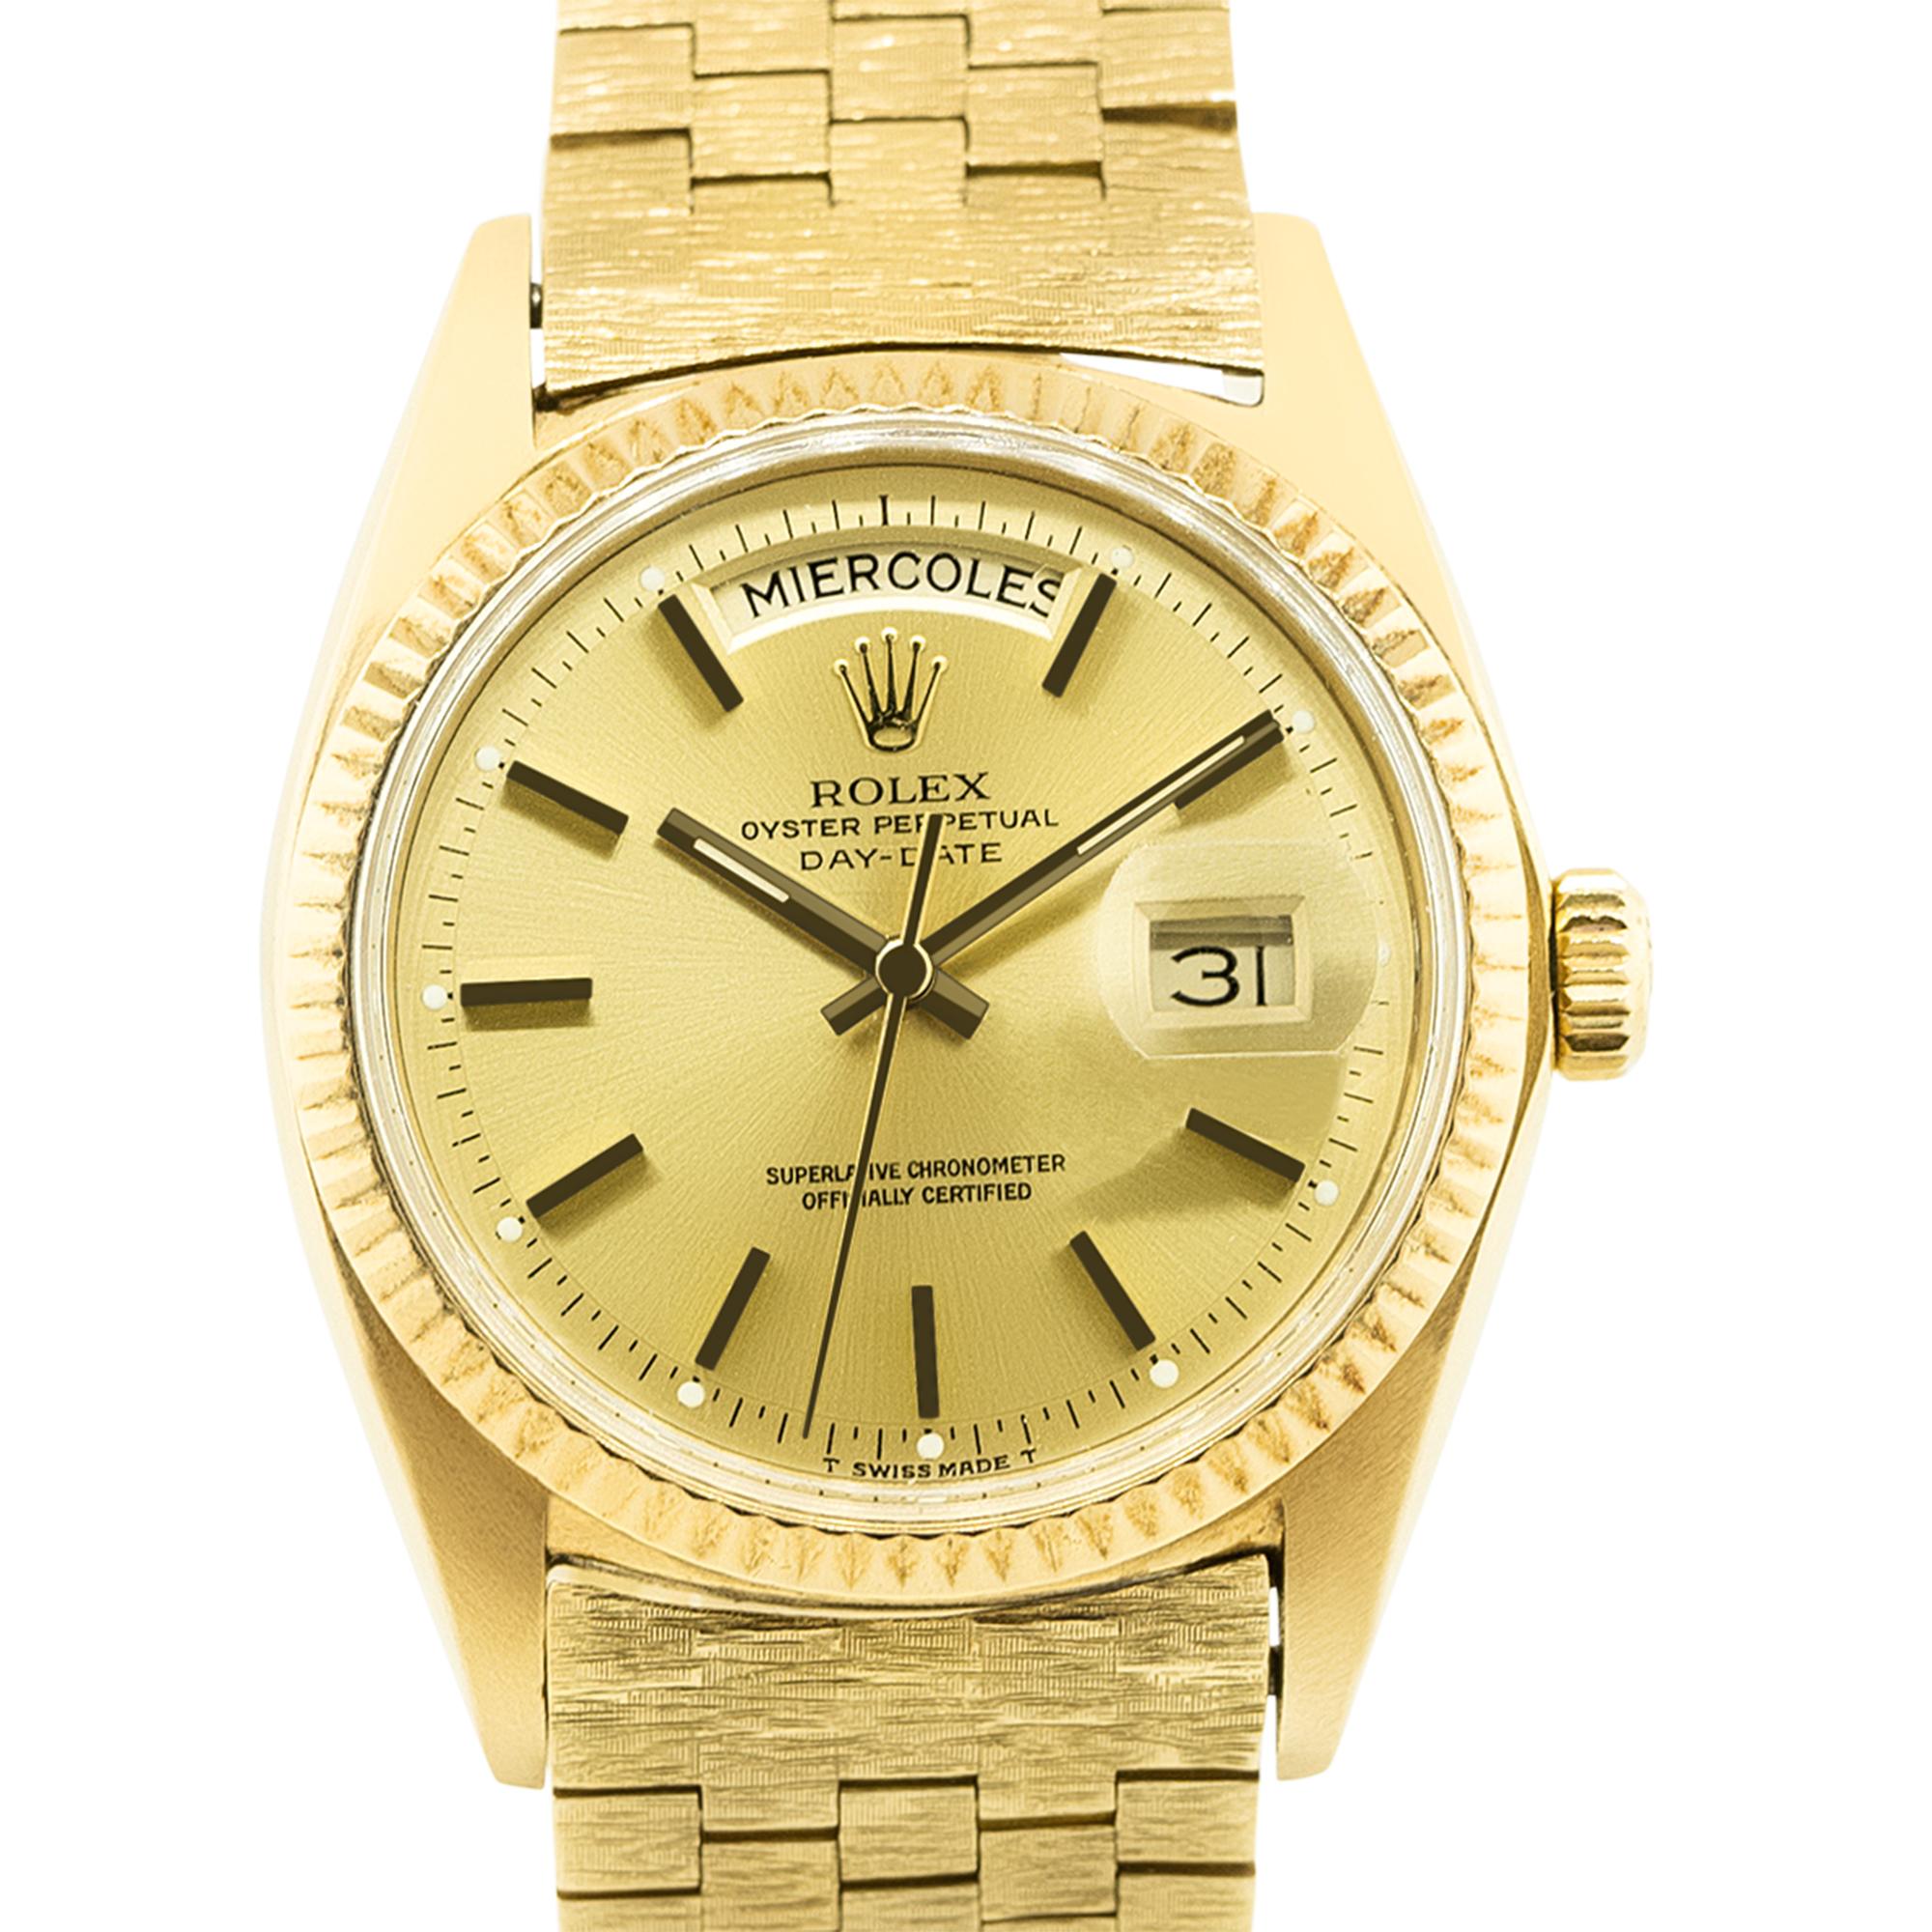 Brand: Rolex
Model: Day-Date
Serial: 2mill
Reference: 1803
Case Material: 18k Yellow Gold
Movement: Automatic
Case Measurement: 36mm
Dial: Gold dial with Spanish day (factory)
Crystal: Plastic Crystal
Bracelet: Rare 18k Yellow Gold Bark